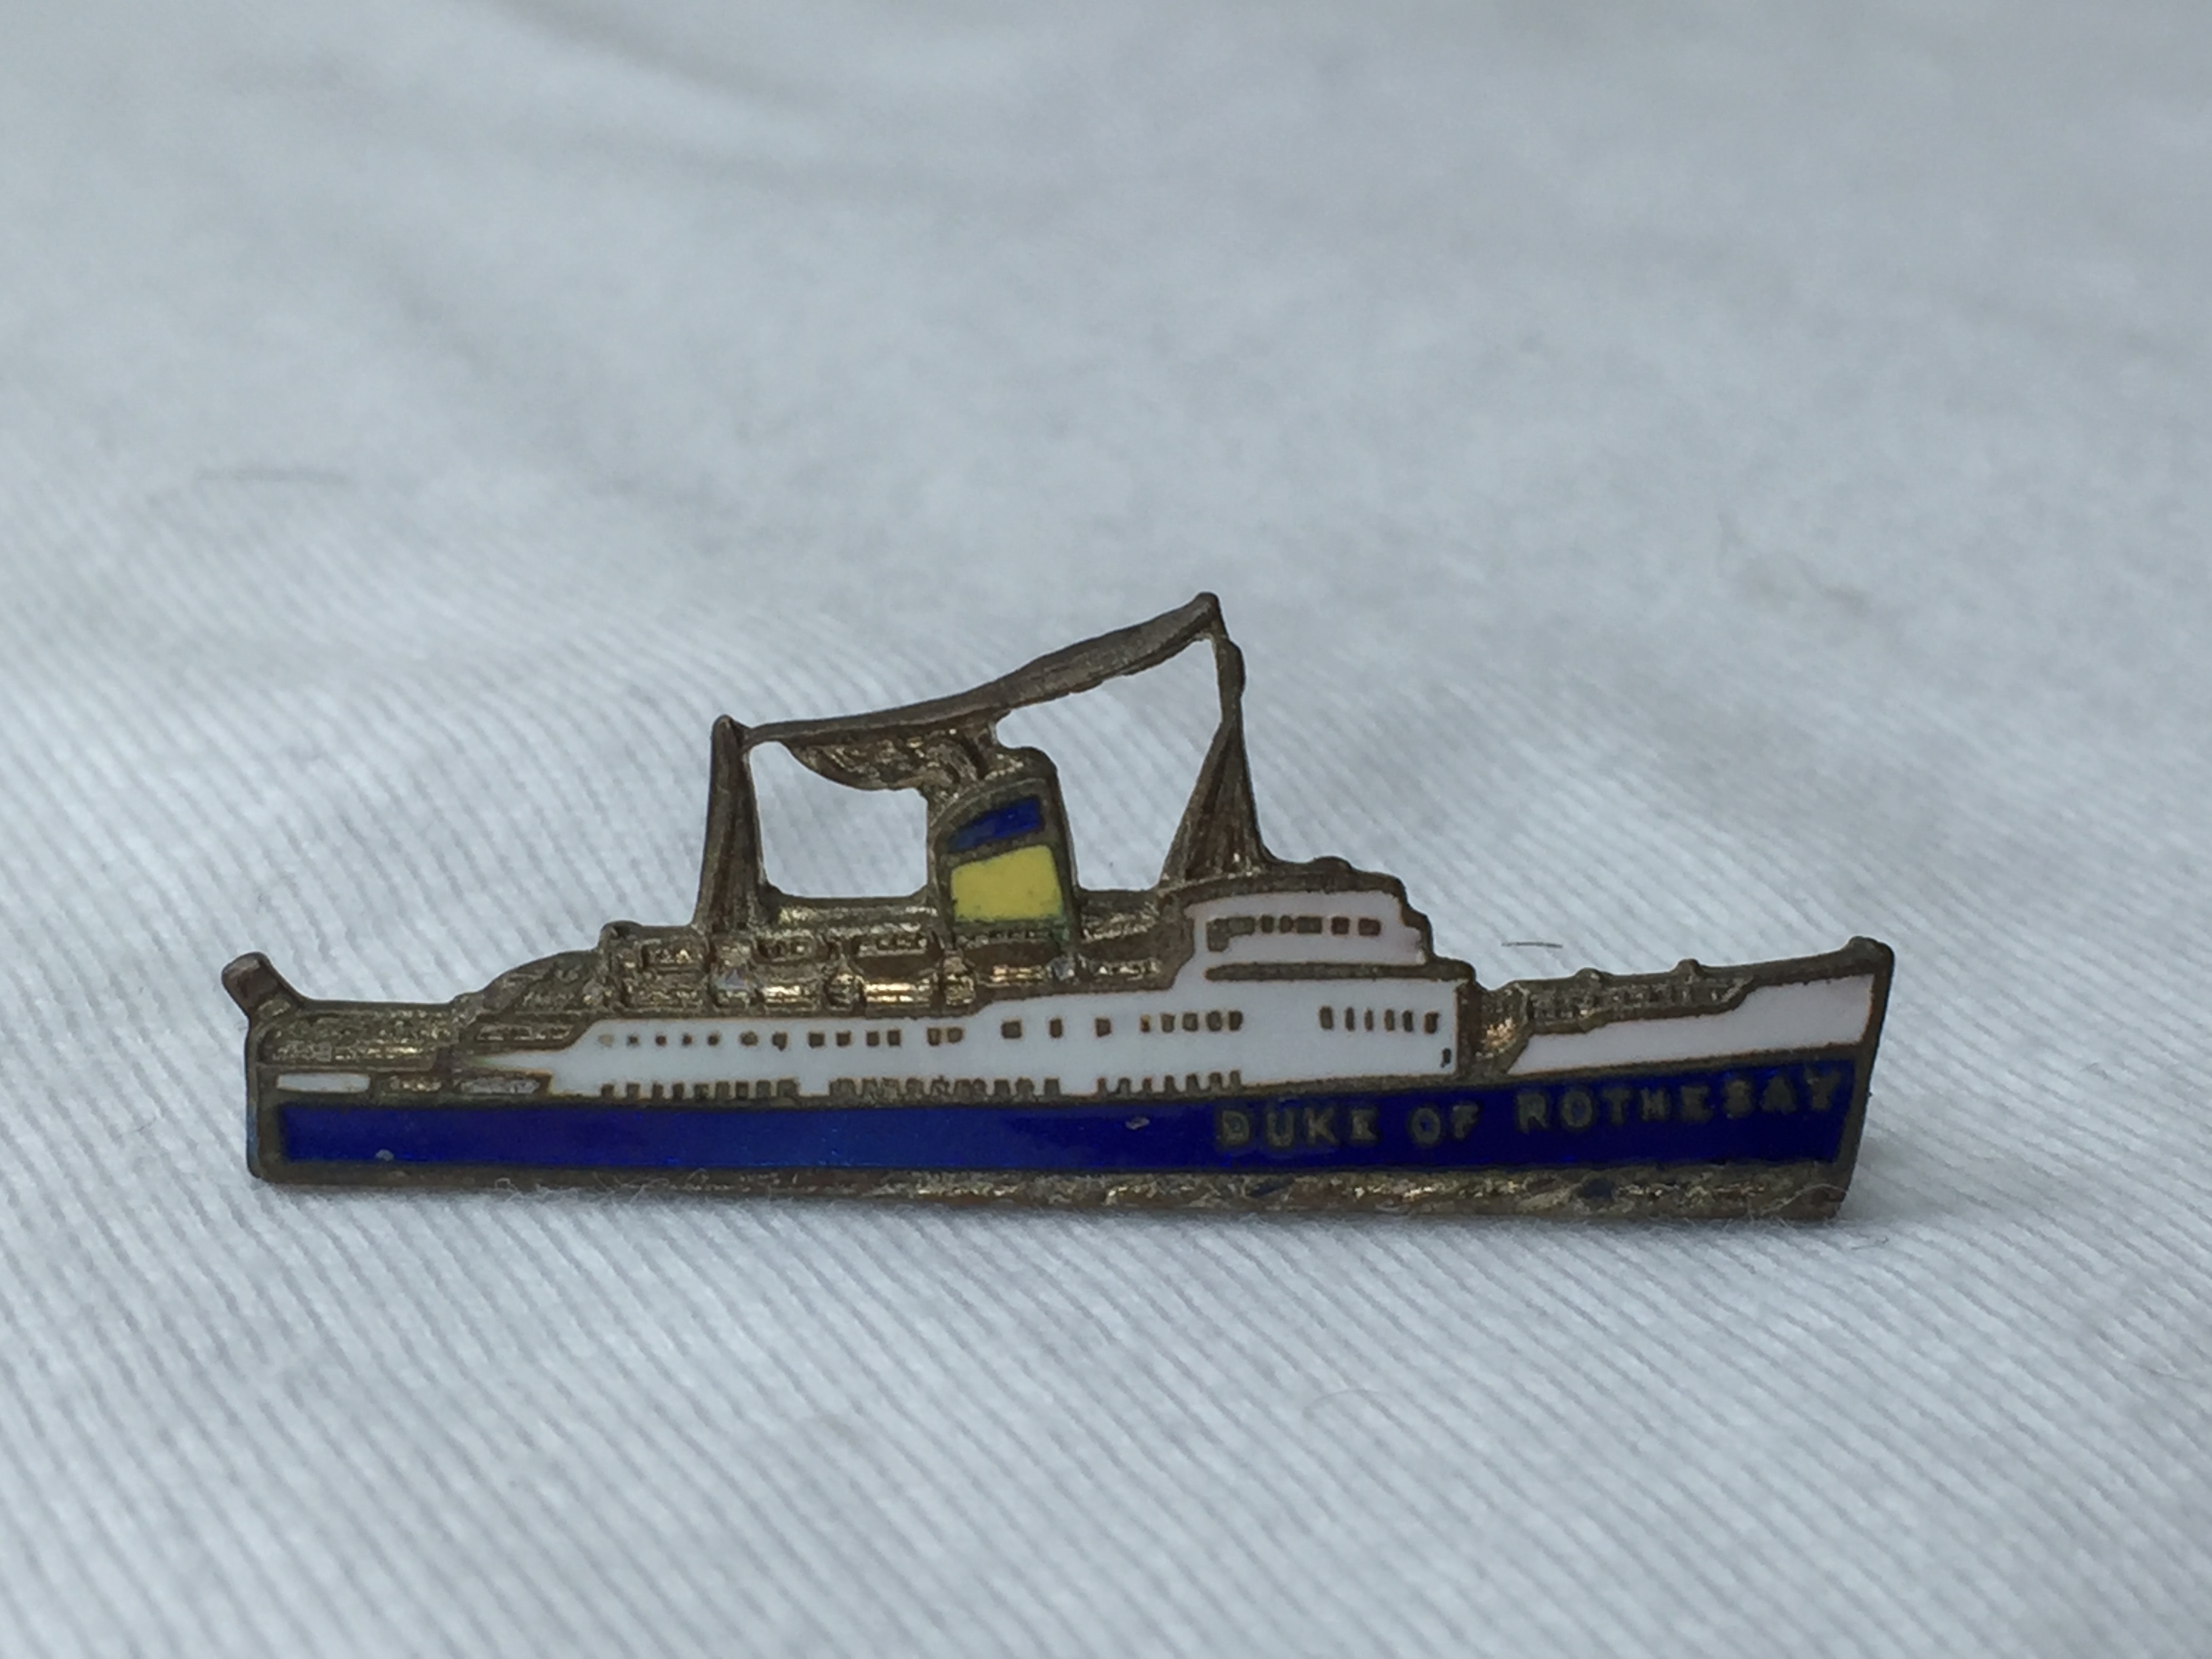 SHIP SHAPE LAPEL PIN FROM THE FISHGUARD-ROSSLAKE FERRY CROSSING VESSEL THE DUKE OF ROTHESAY